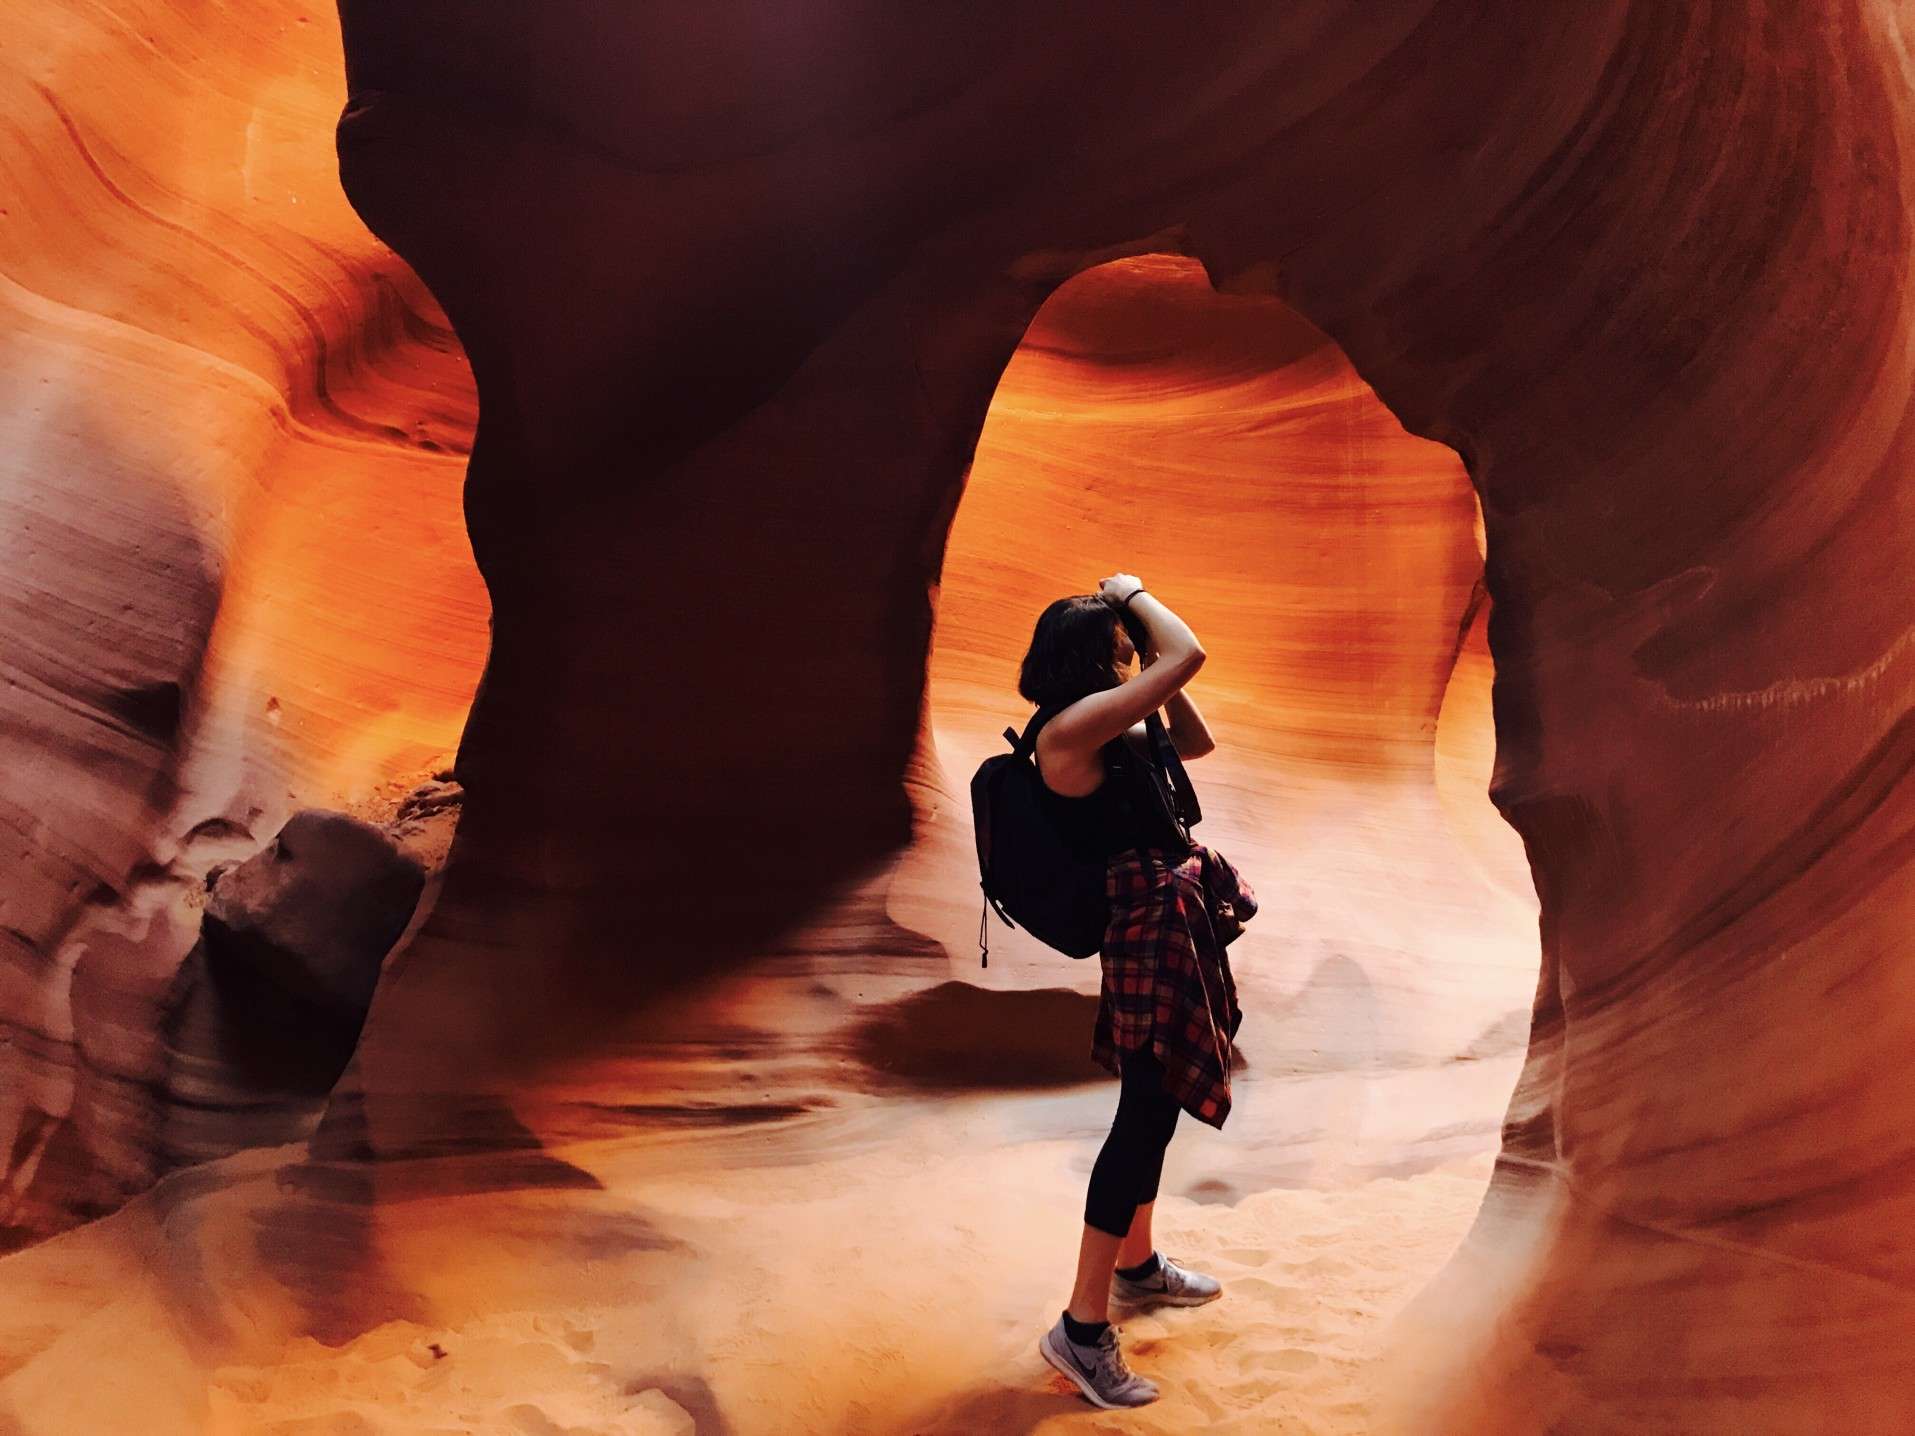 Woman taking a picture while on a tour of a slot canyon